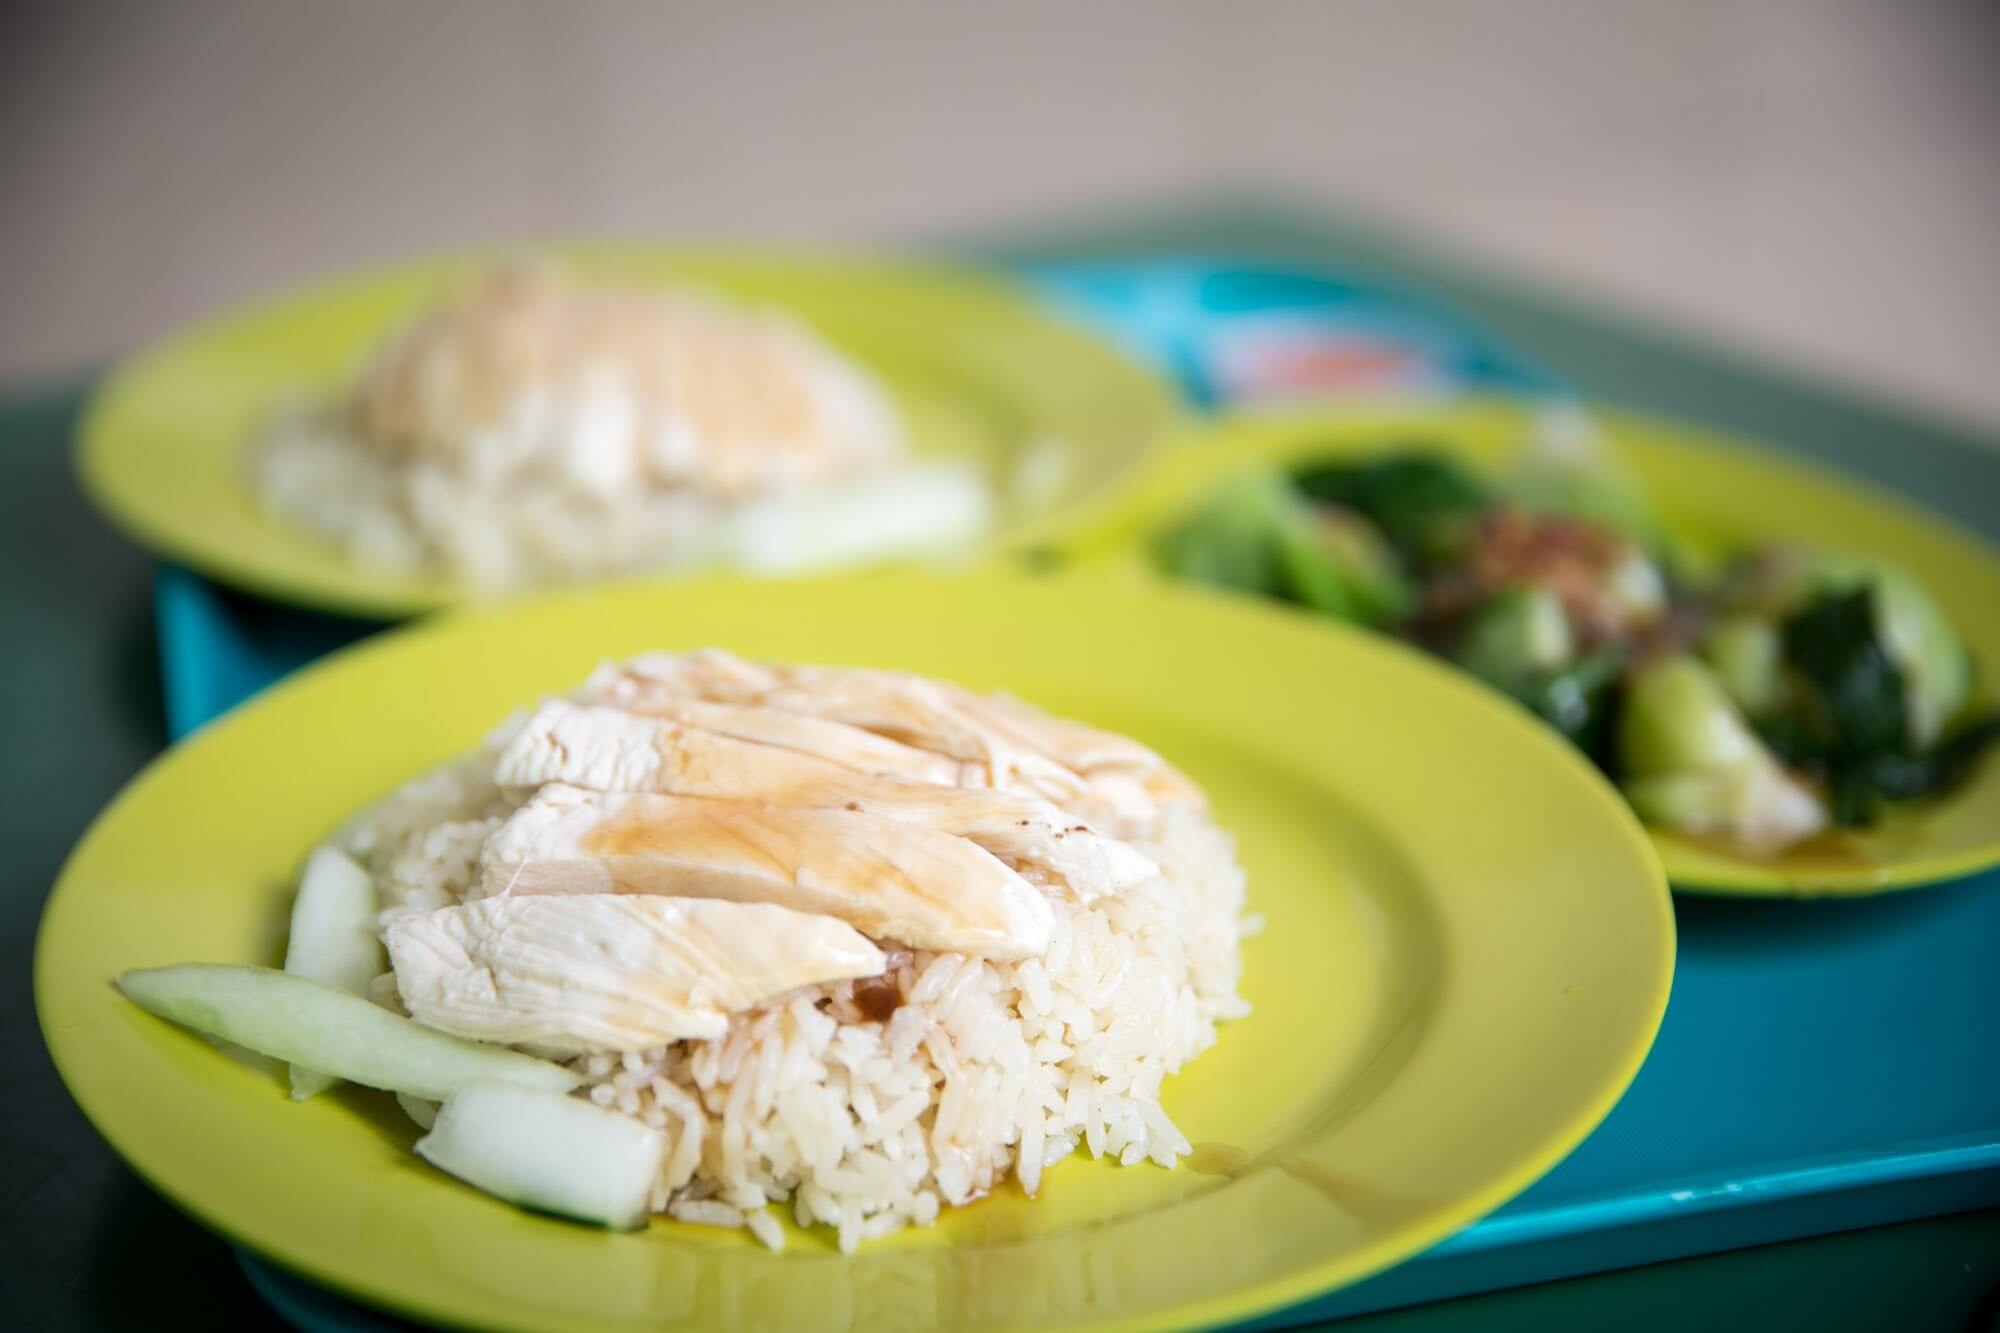 Singapore chicken rice, approved by Anthony Bourdain, at the Maxwell Food Centre